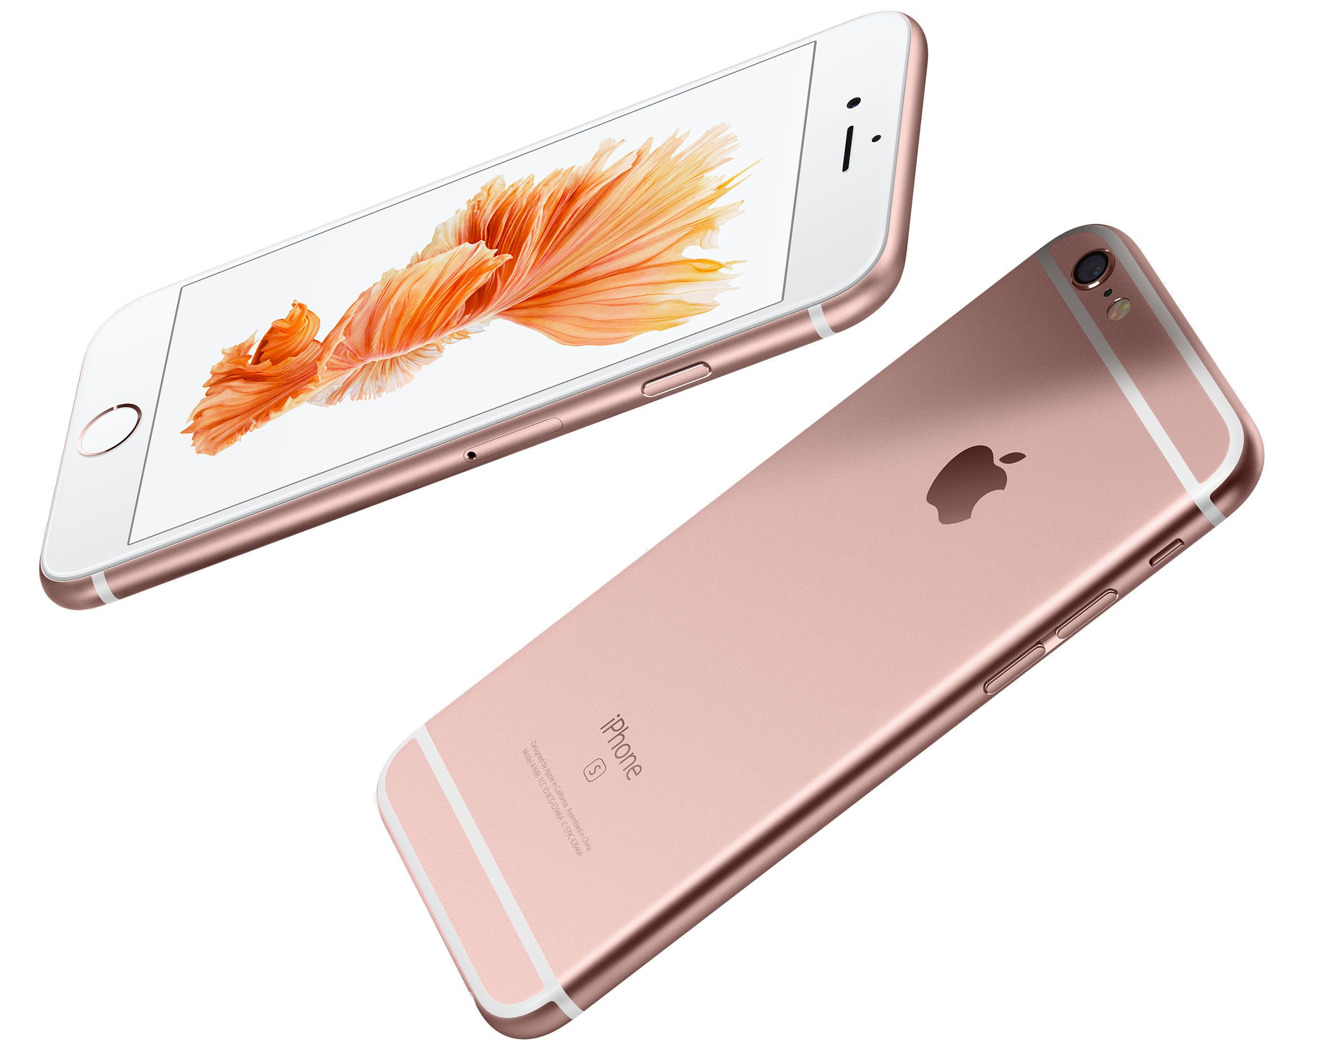 Apple iPhone 6s in Rose Gold